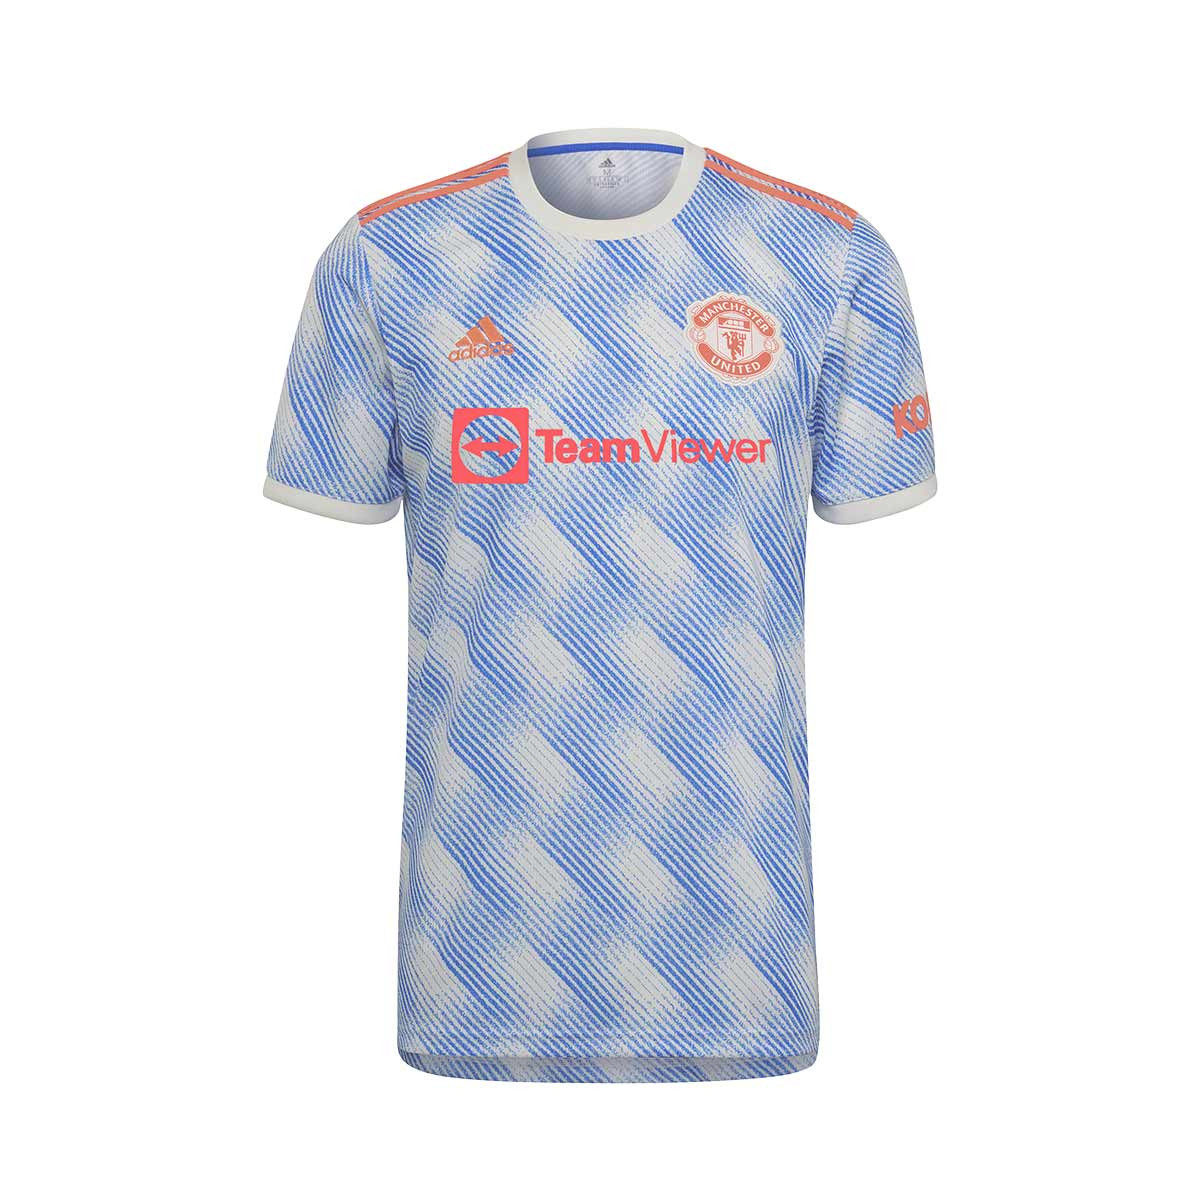 Adidas Kids Manchester United FC Authentic Away Kit 2021-2022 Kit ...